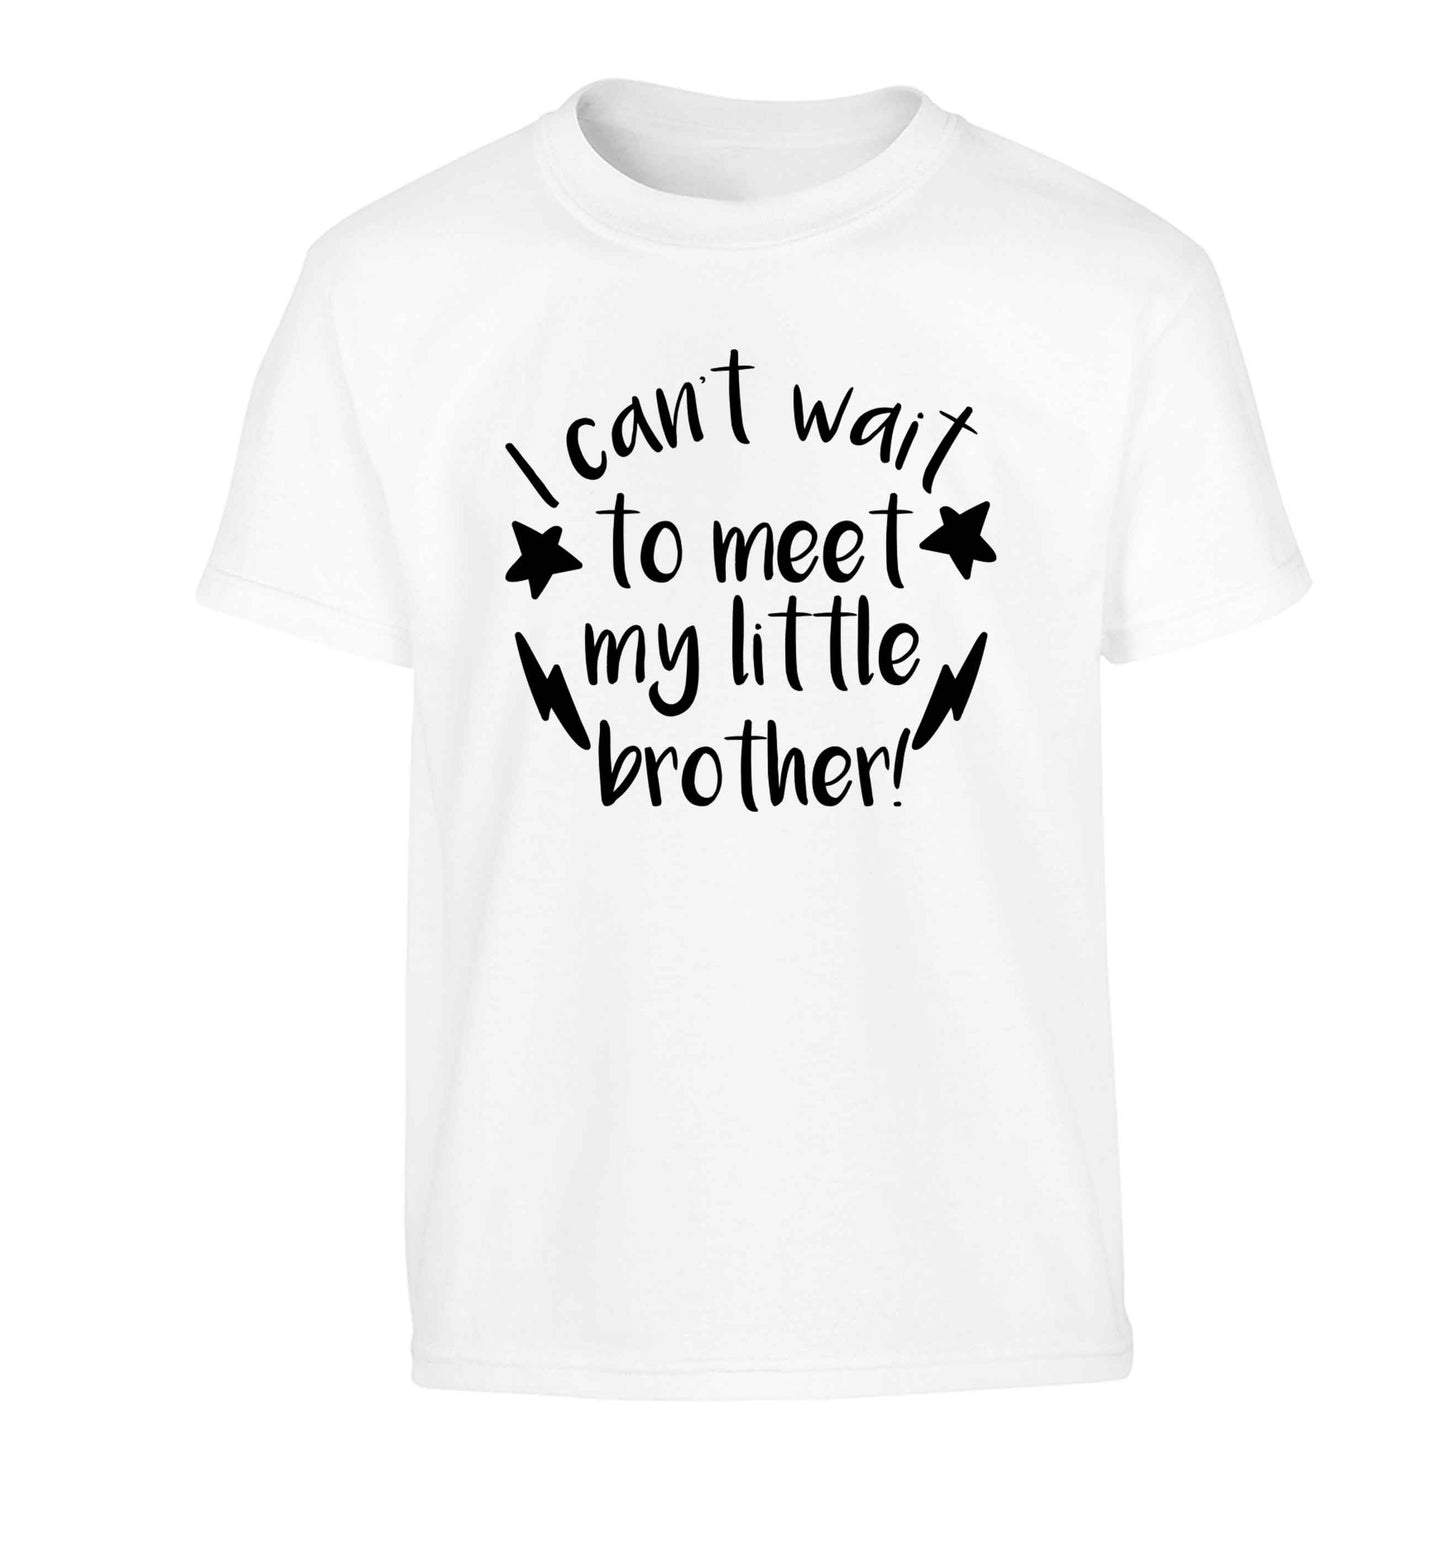 I can't wait to meet my sister! Children's white Tshirt 12-13 Years